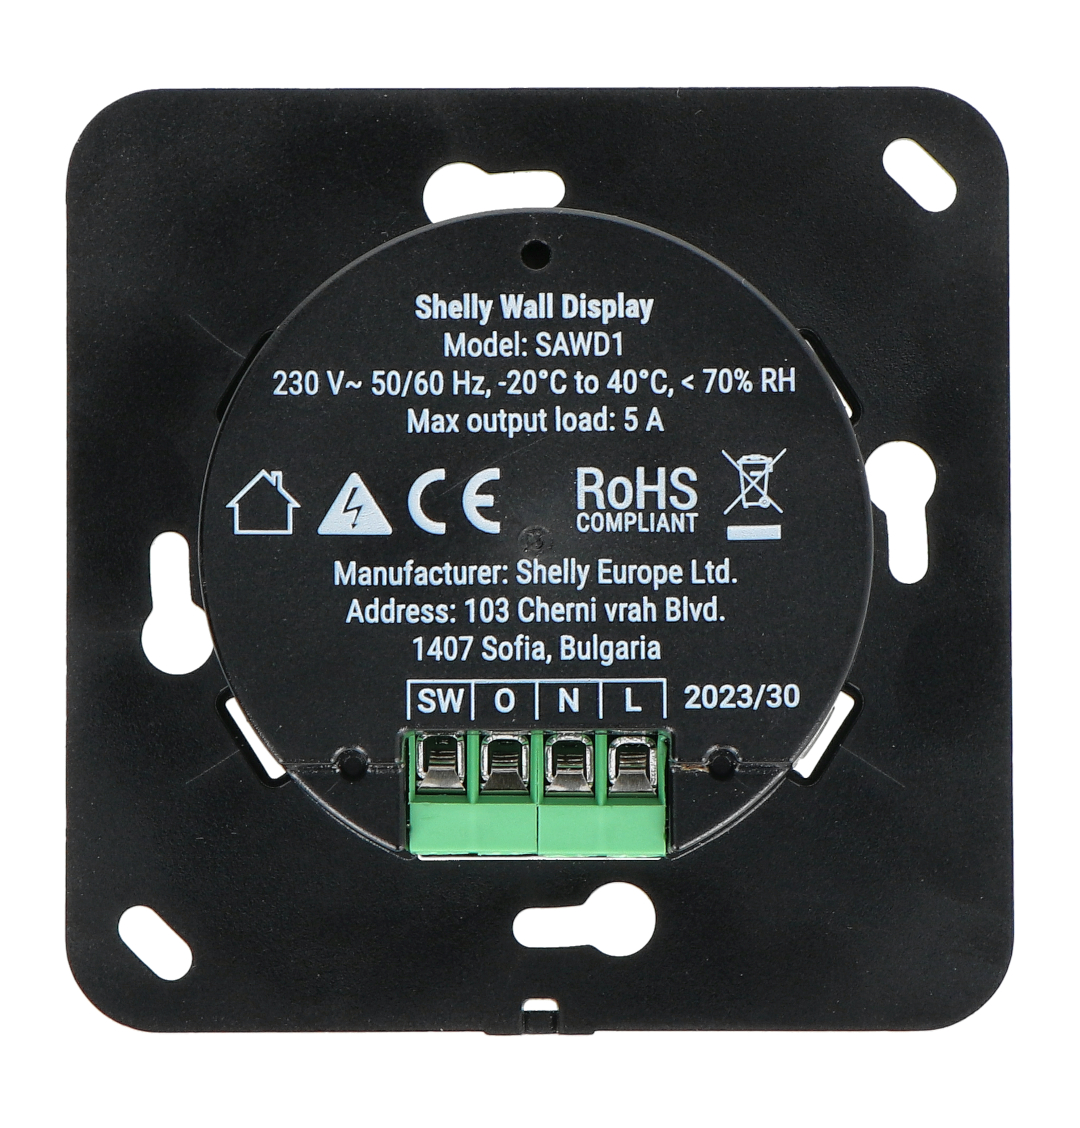 Shelly Plus PM Mini - 1x Smart Switch With 230V/8A WiFi/Bluetooth - Power  Metering Botland - Robotic Shop